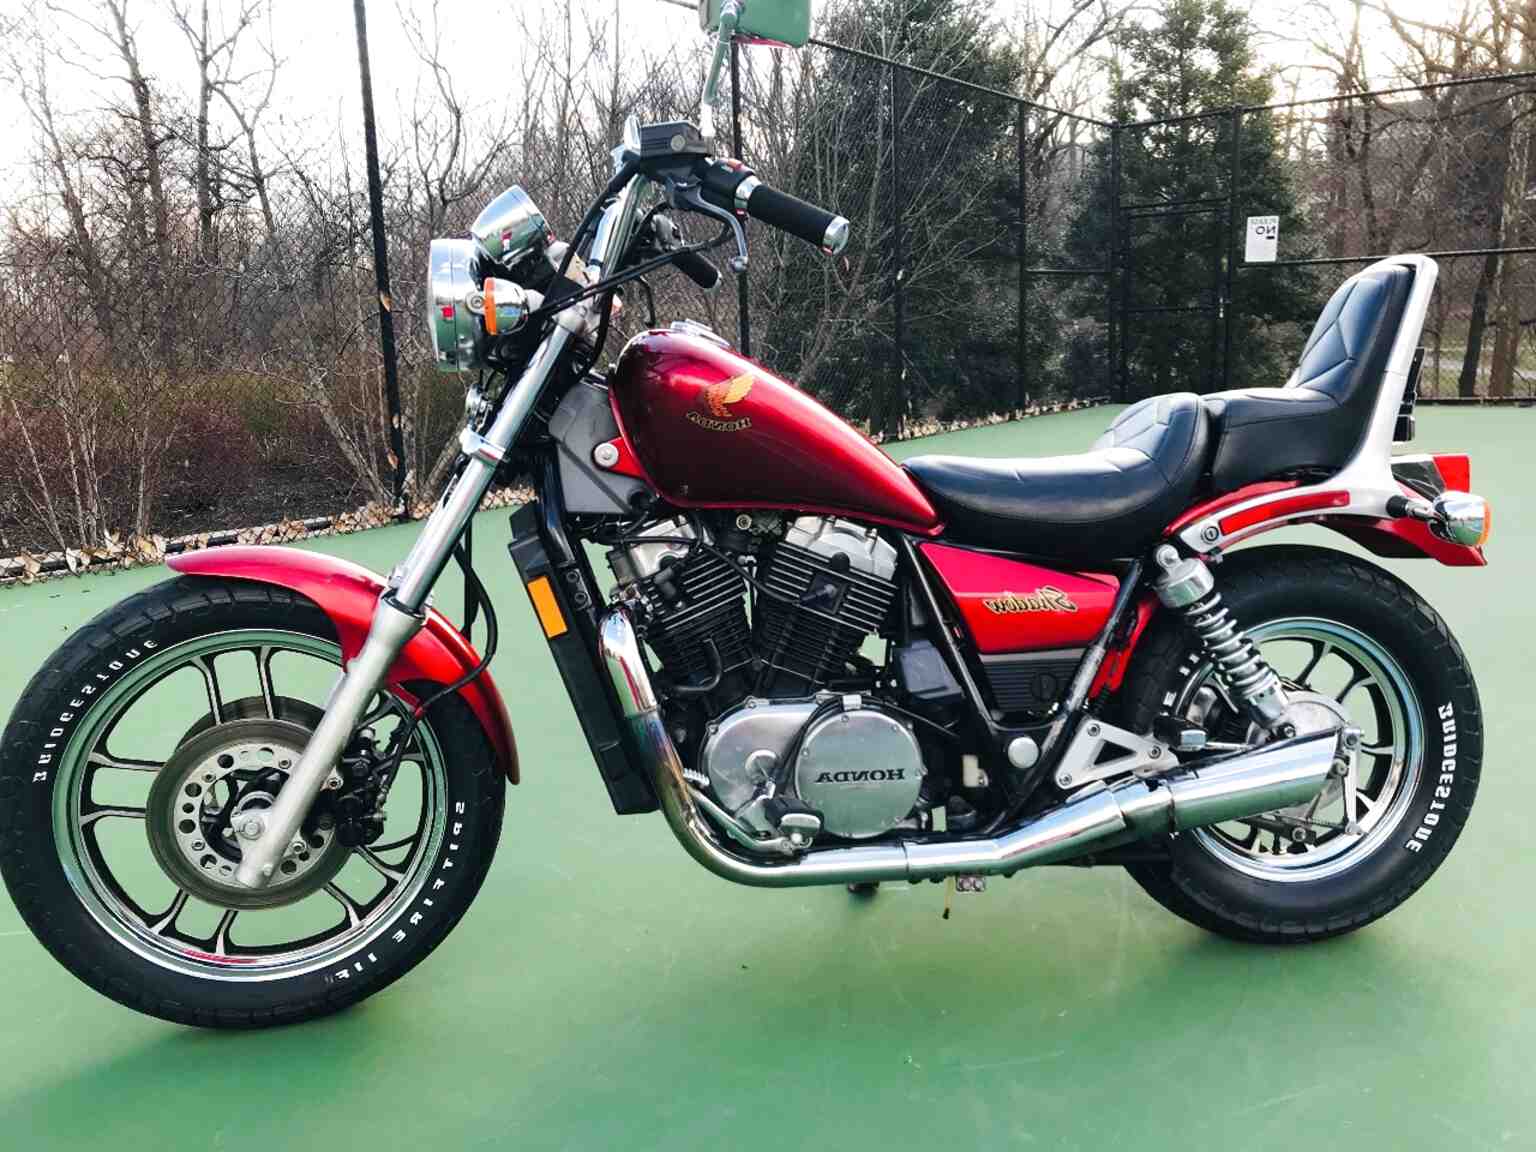 1985 Honda Shadow 700 for sale in UK View 53 bargains